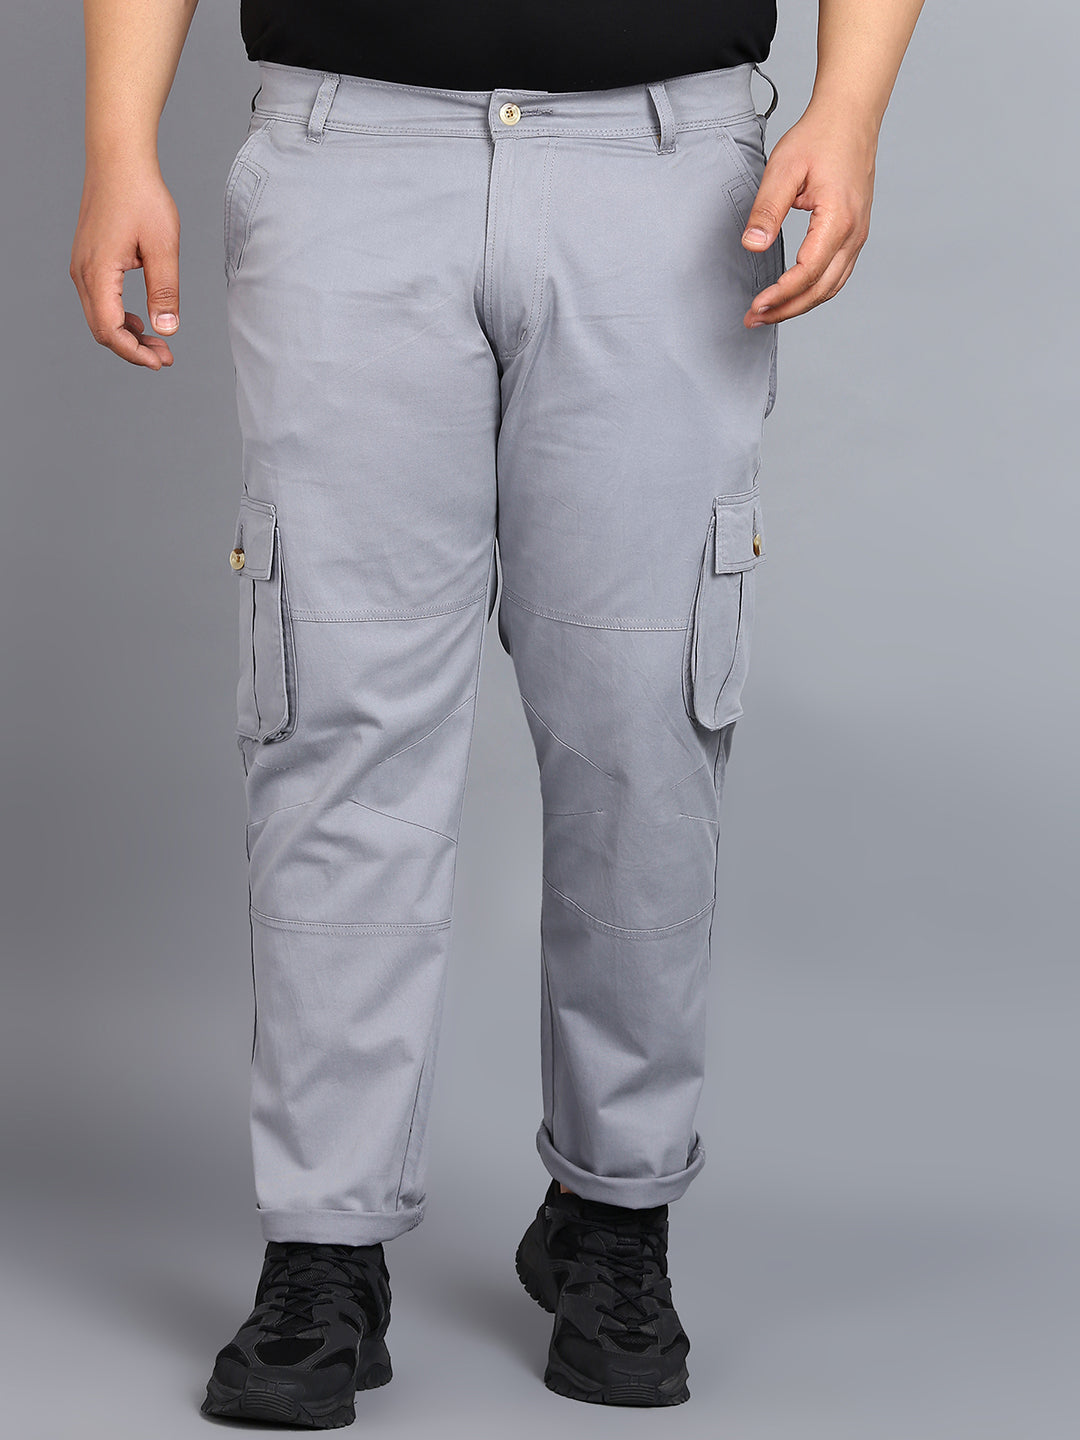 Plus Men's Light Blue Regular Fit Solid Cargo Chino Pant with 6 Pockets